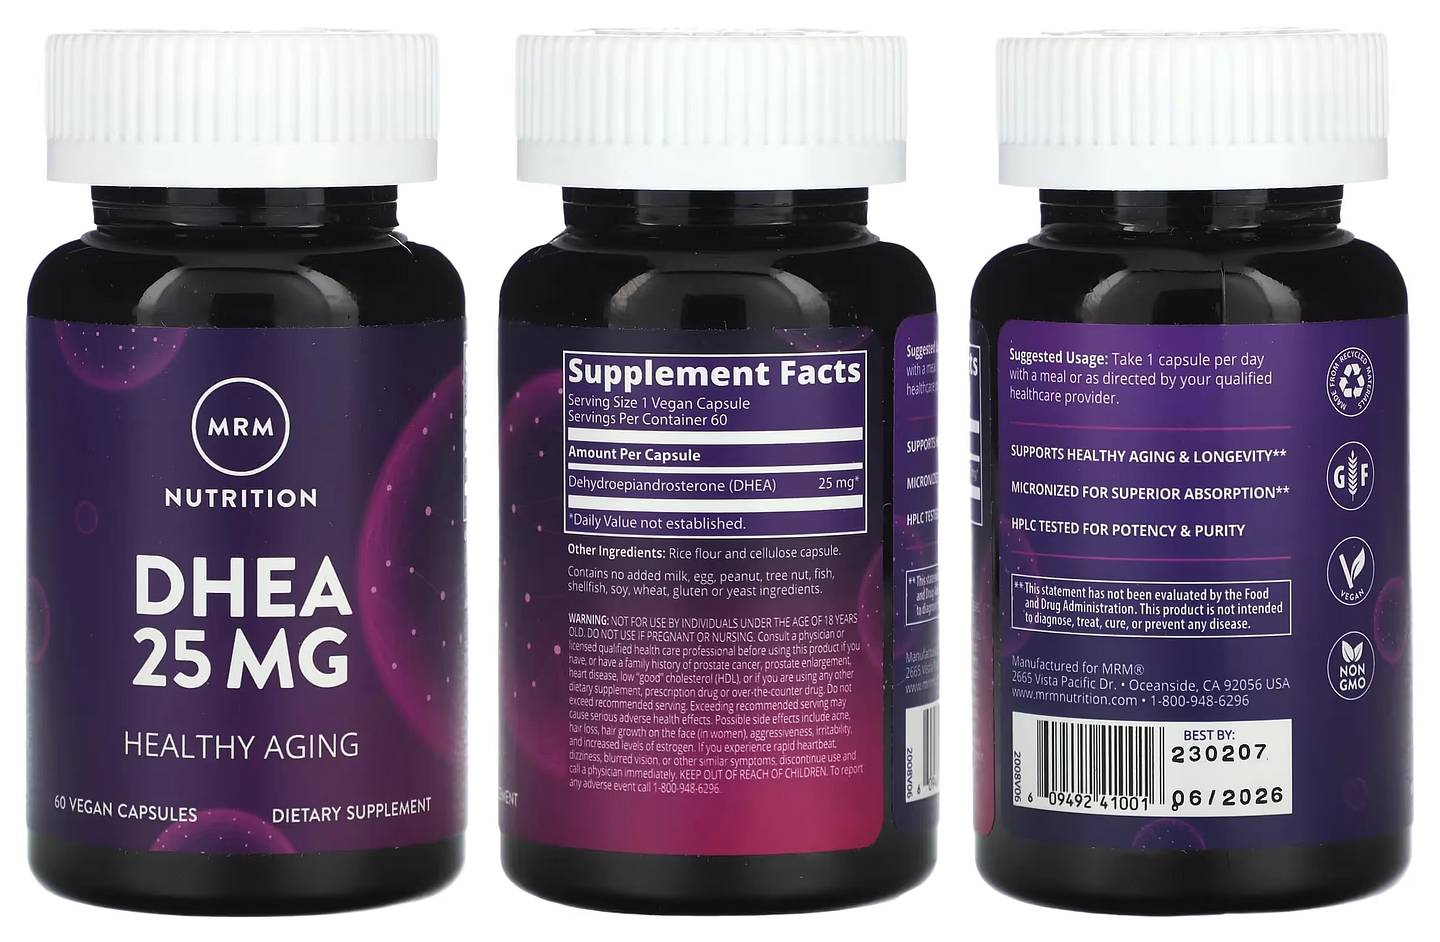 MRM Nutrition, DHEA packaging